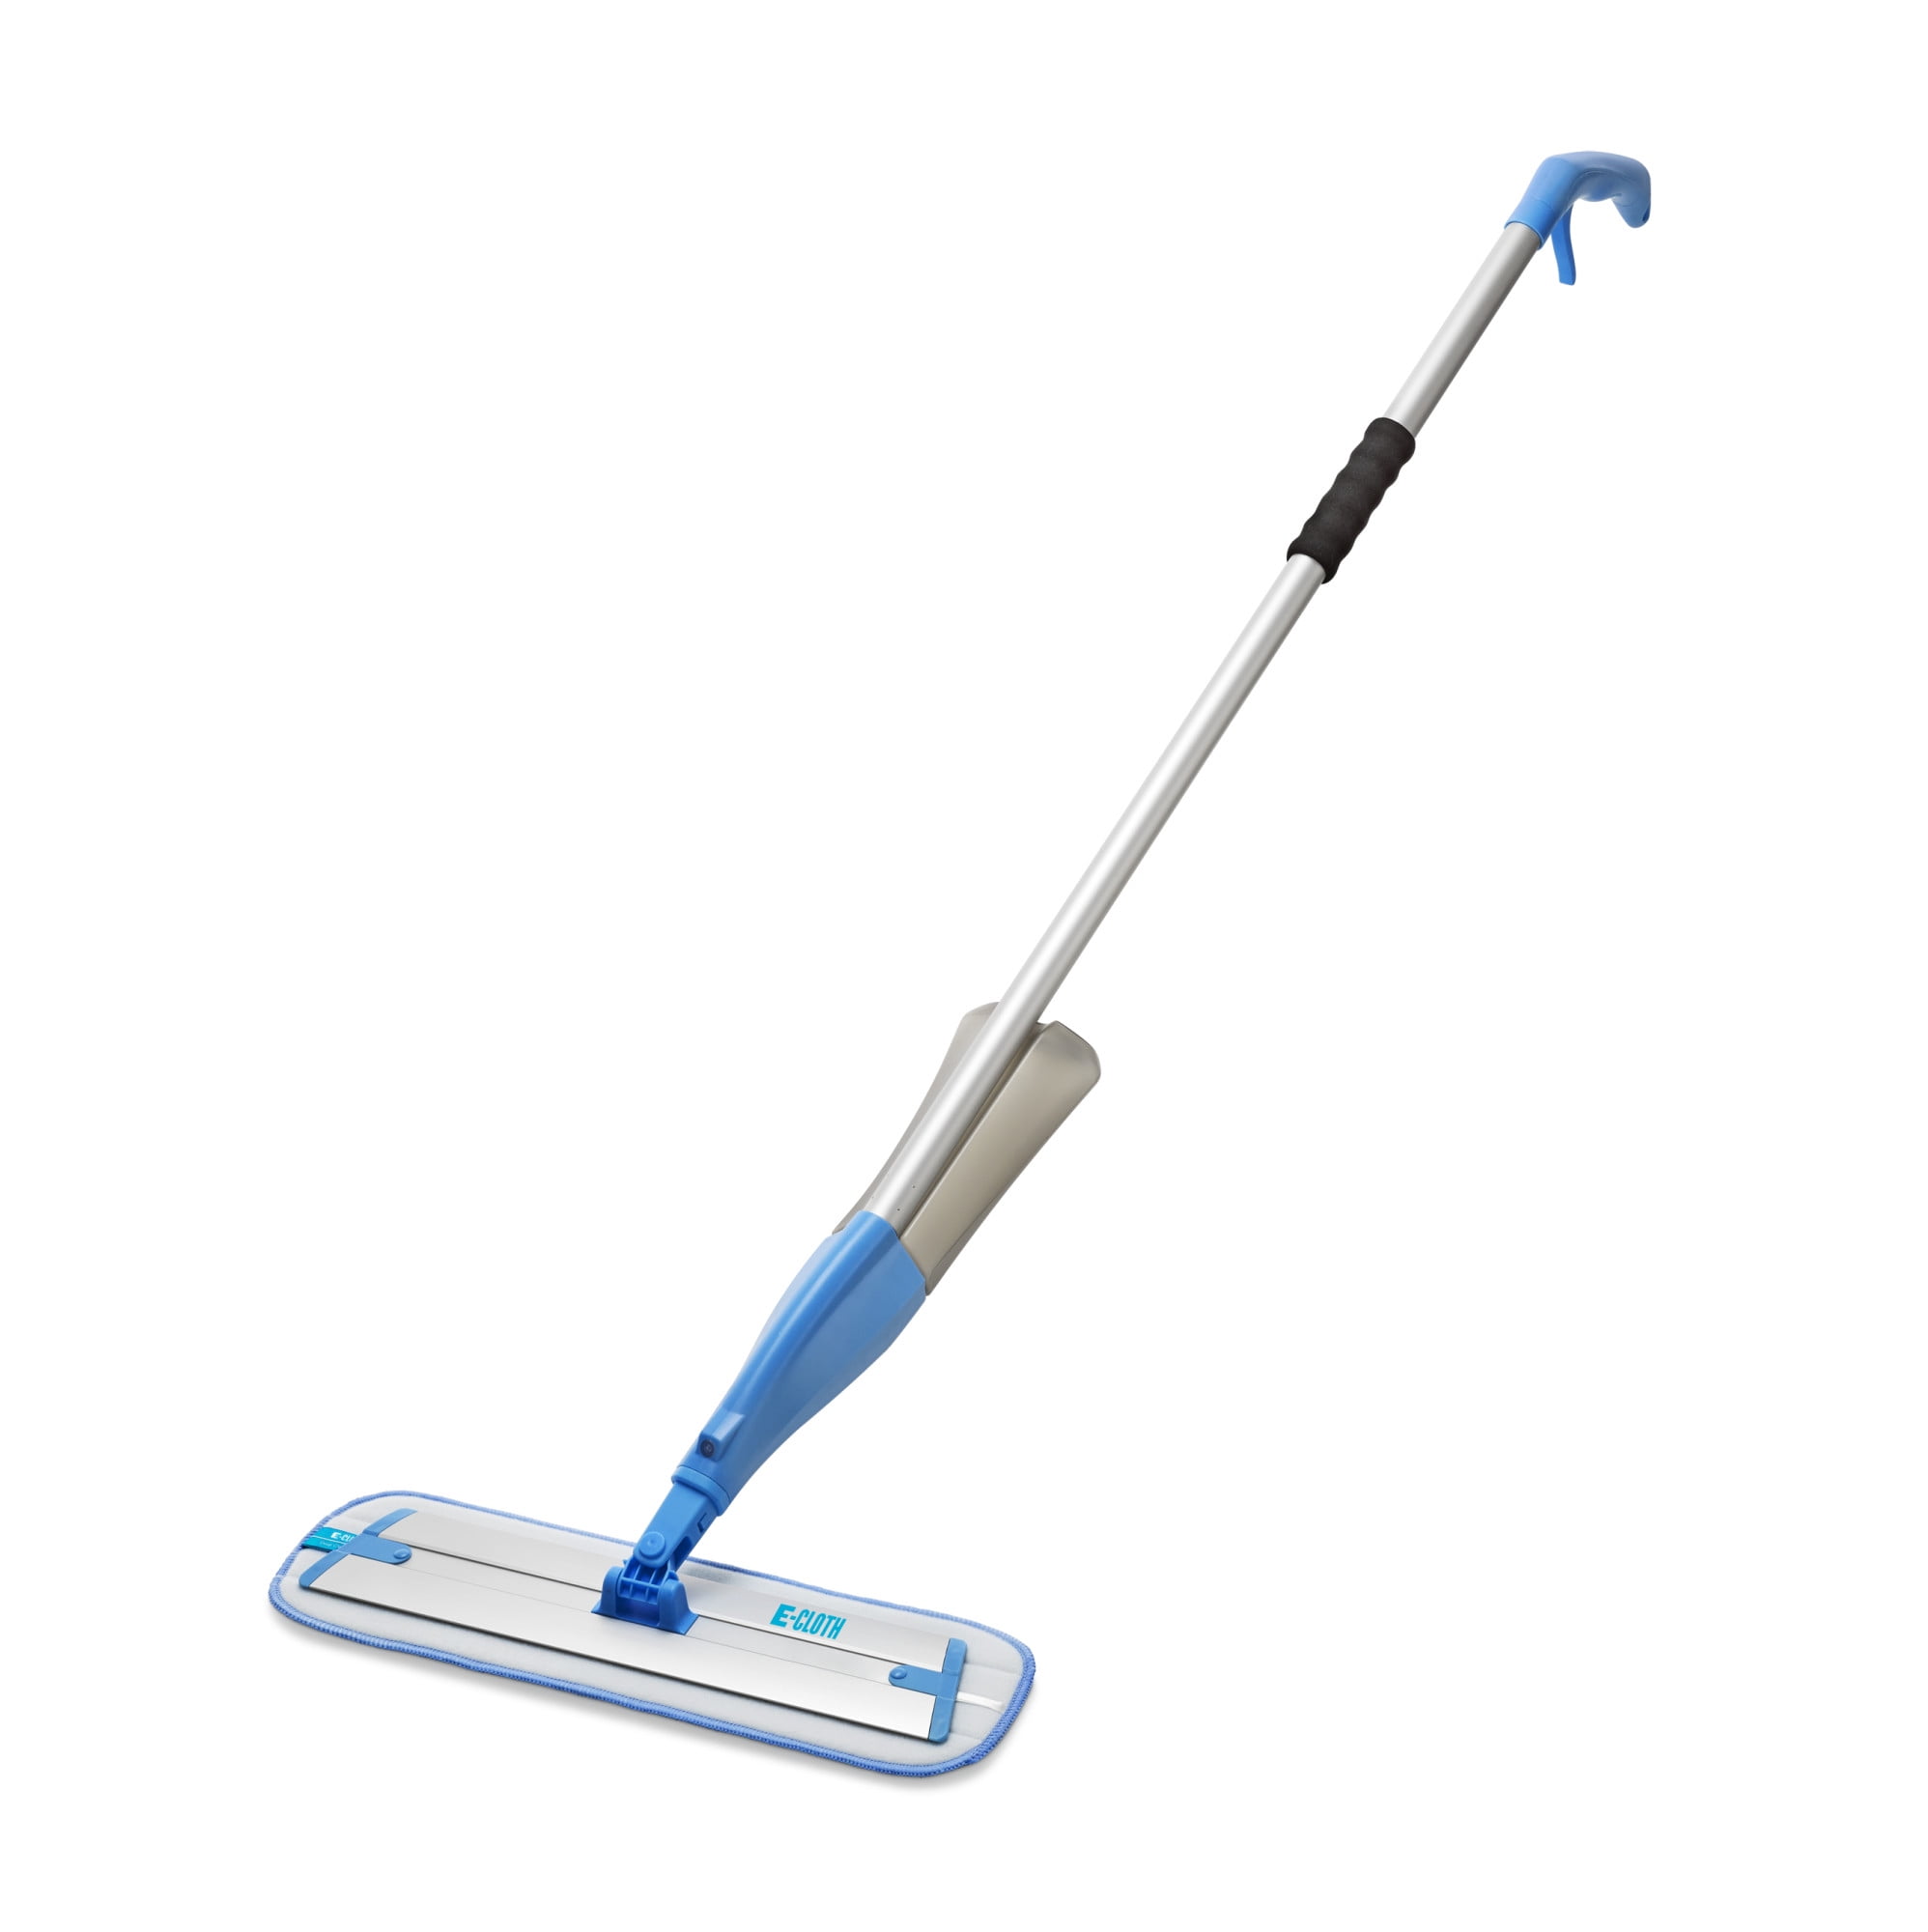 Oreck Deep Cleaning Hard Floor Wet Mop, with Microfiber Head by E-CLOTH, AK51000, Blue